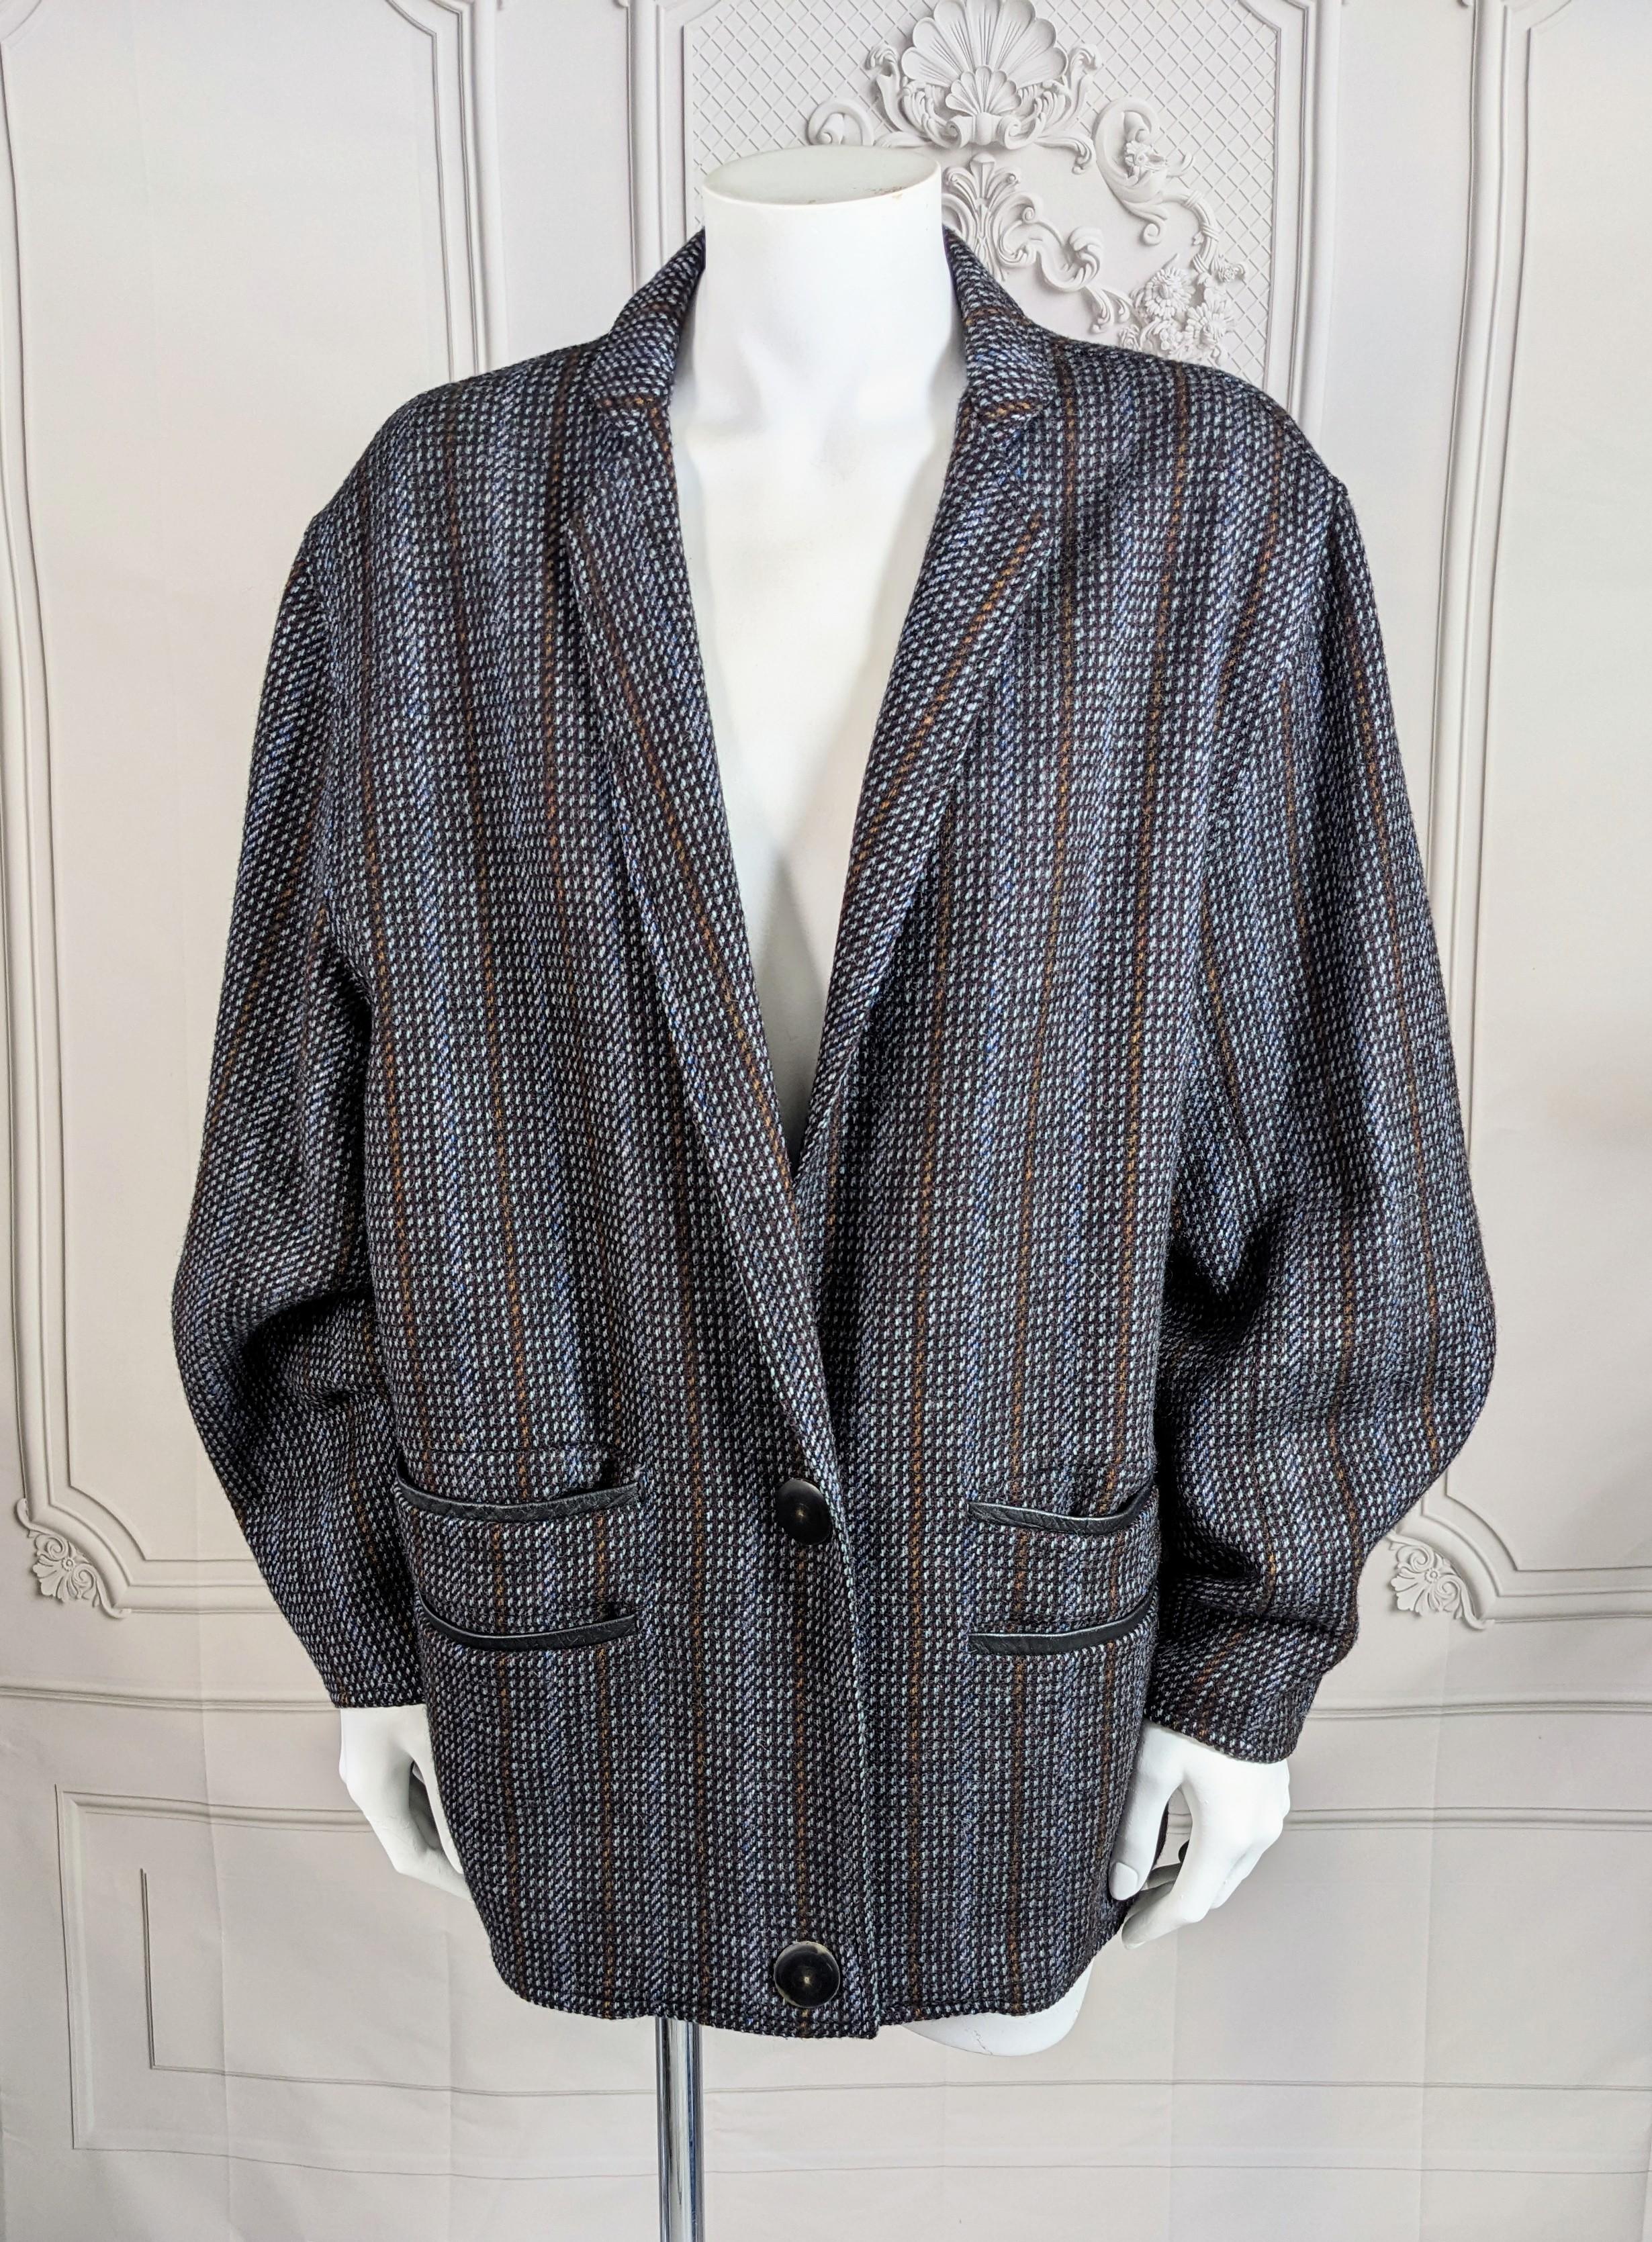 Anne Marie Beretta Sculpted Tweed Jacket  In Good Condition For Sale In New York, NY